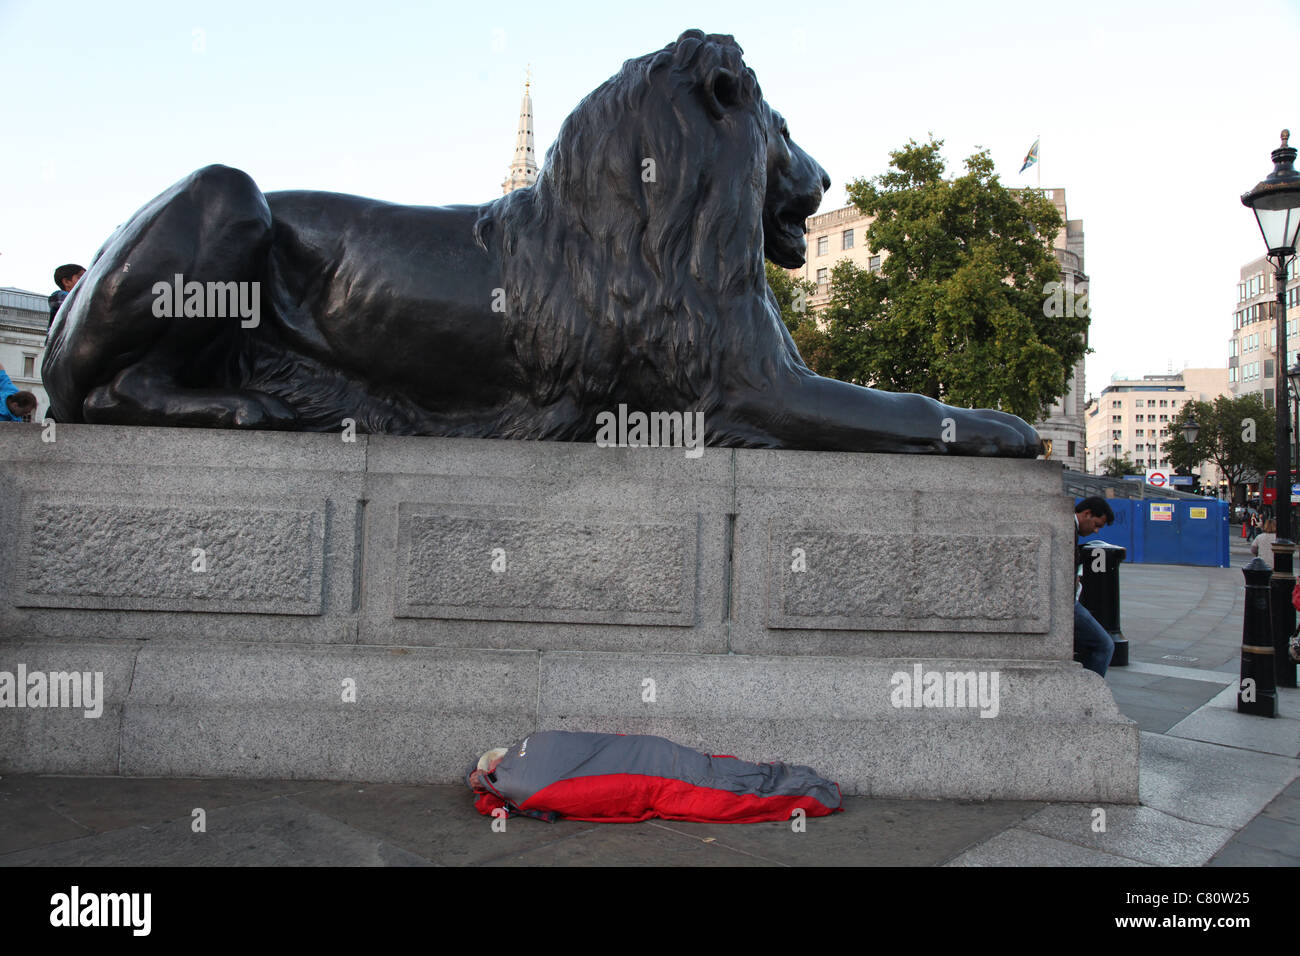 Homeless sleeper underneath one of the lions at Trafalgar Square, London Stock Photo